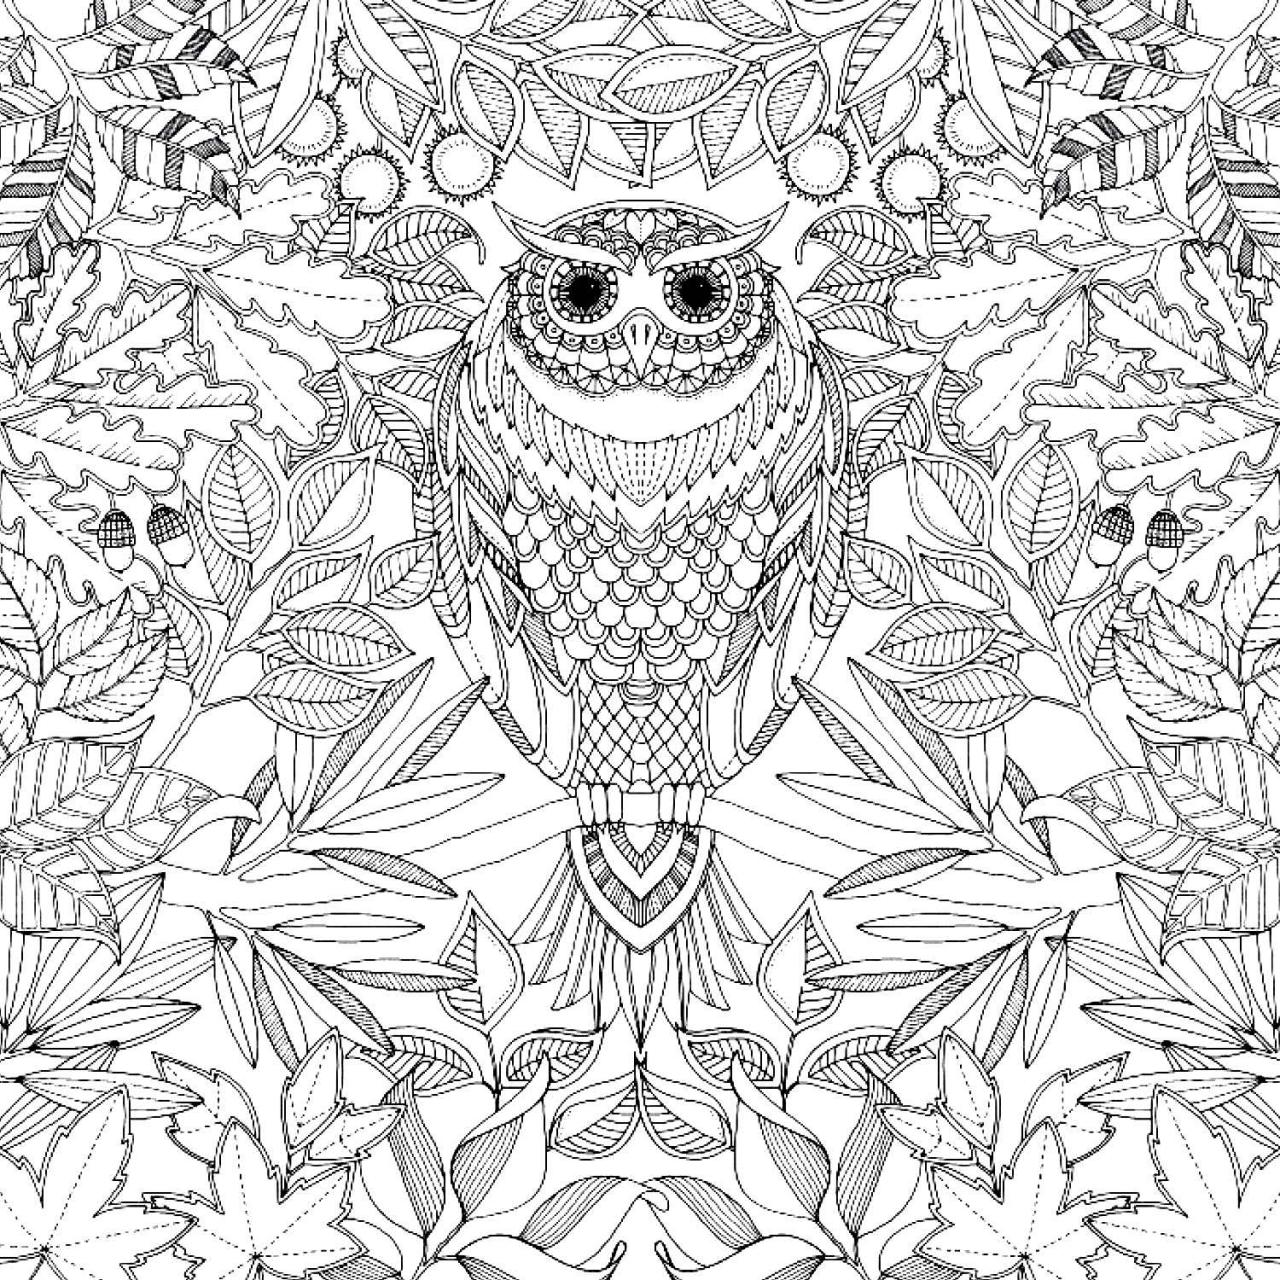 Secret Garden Free Coloring Pages at Free printable